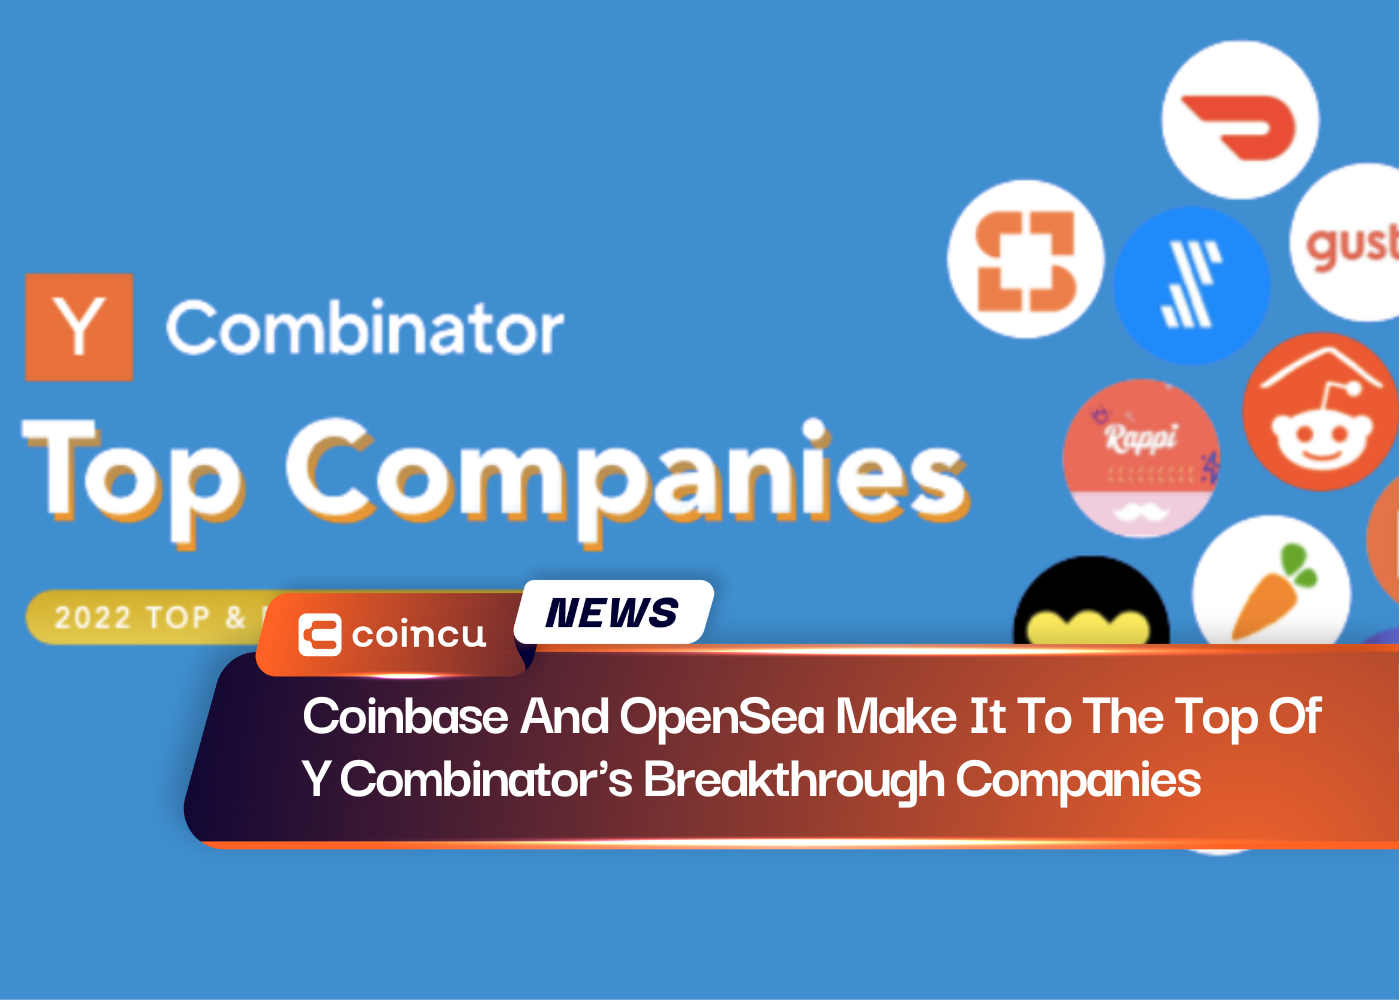 Coinbase And OpenSea Make It To The Top Of Y Combinator's Breakthrough Companies